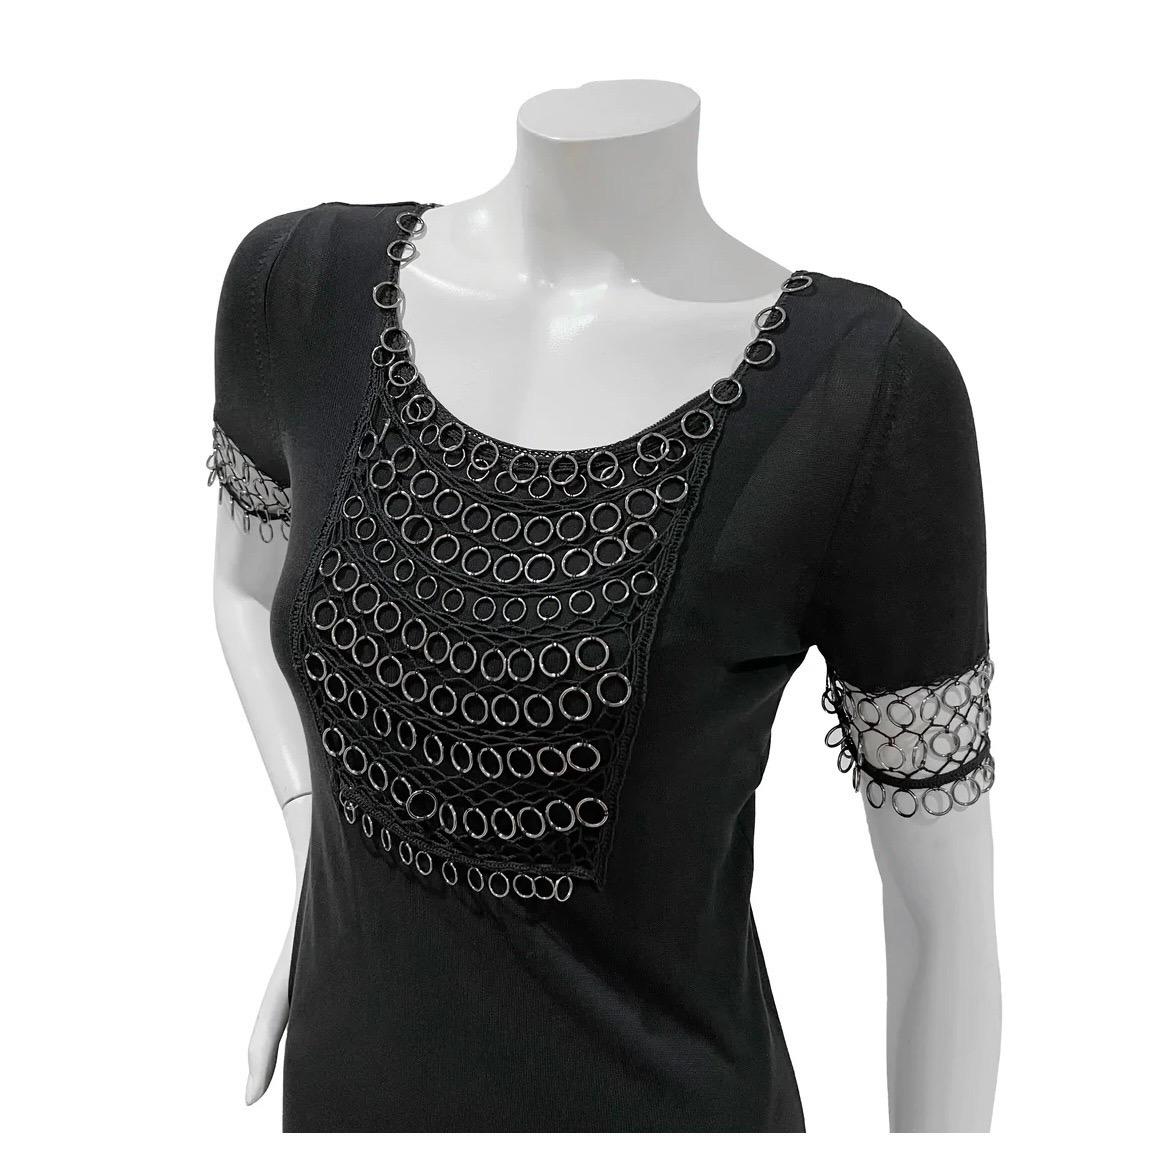 Chainmail Knit Dress by John Galliano for Dior  
Spring/Summer 2007
Made in Italy 
Black 
Short sleeves 
Knee-length 
Loose, flowy fit 
Silver metal chainmail detail at collar, bust, sleeve hem and bottom hem
Tank dress lining layer
100% cotton 